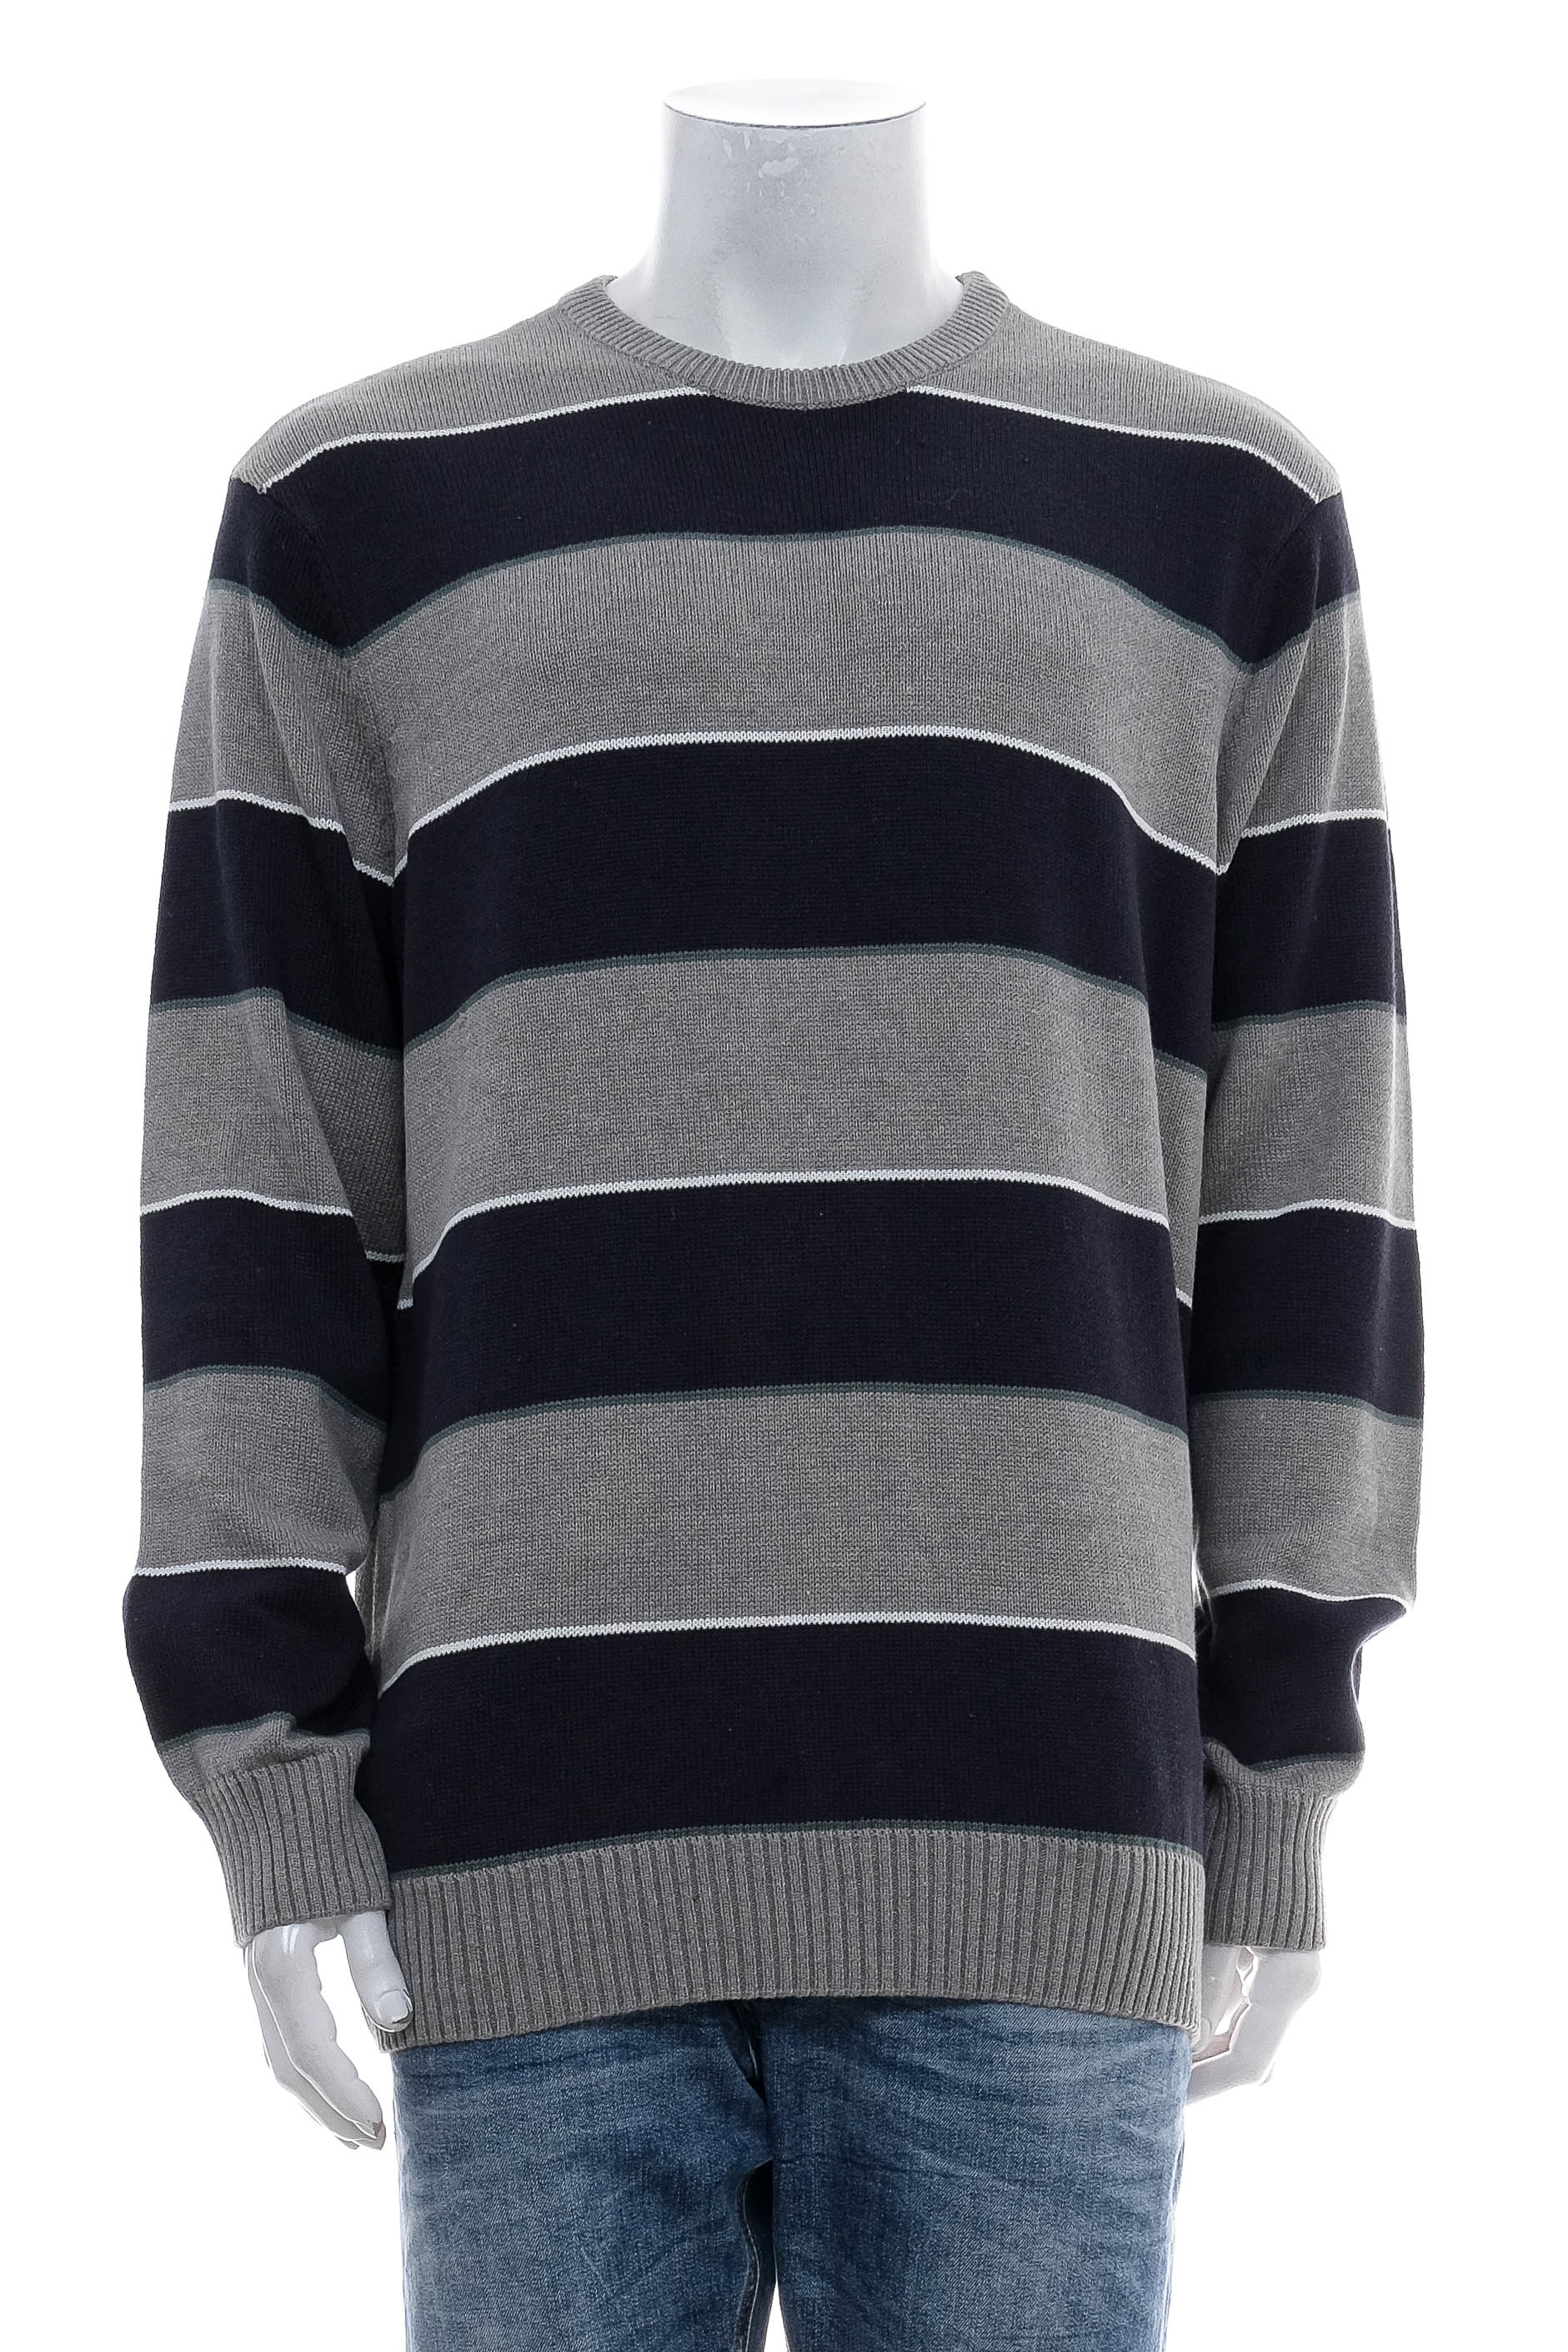 Men's sweater - Grey Connection - 0